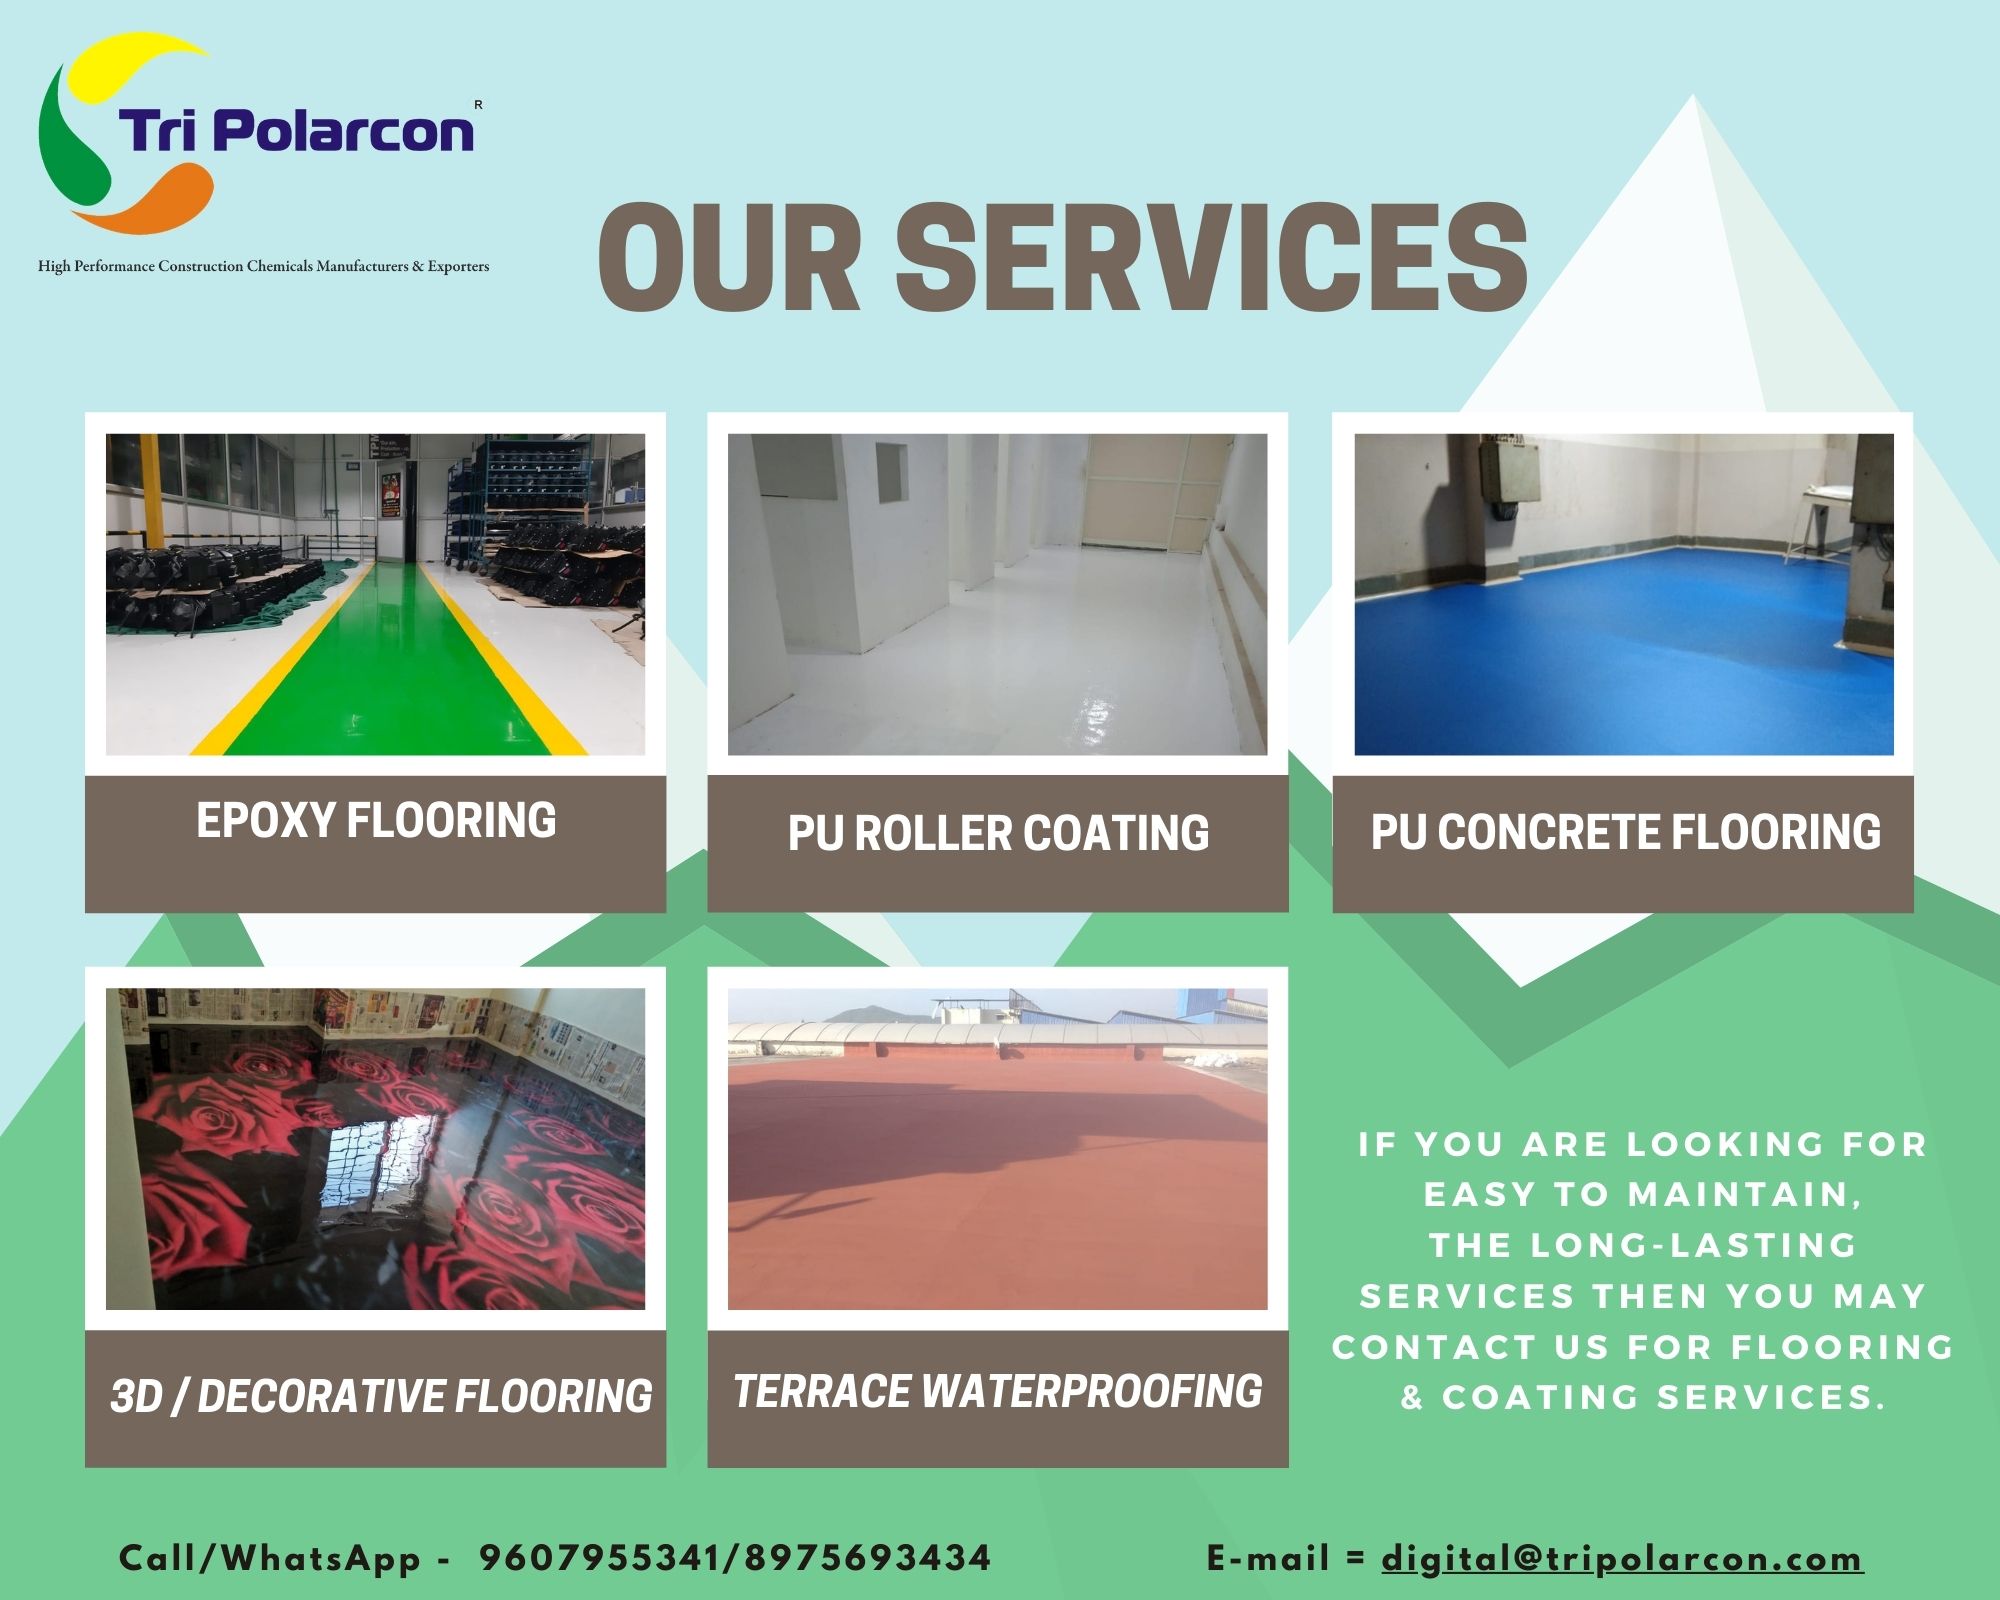 5039231_our services.jpg